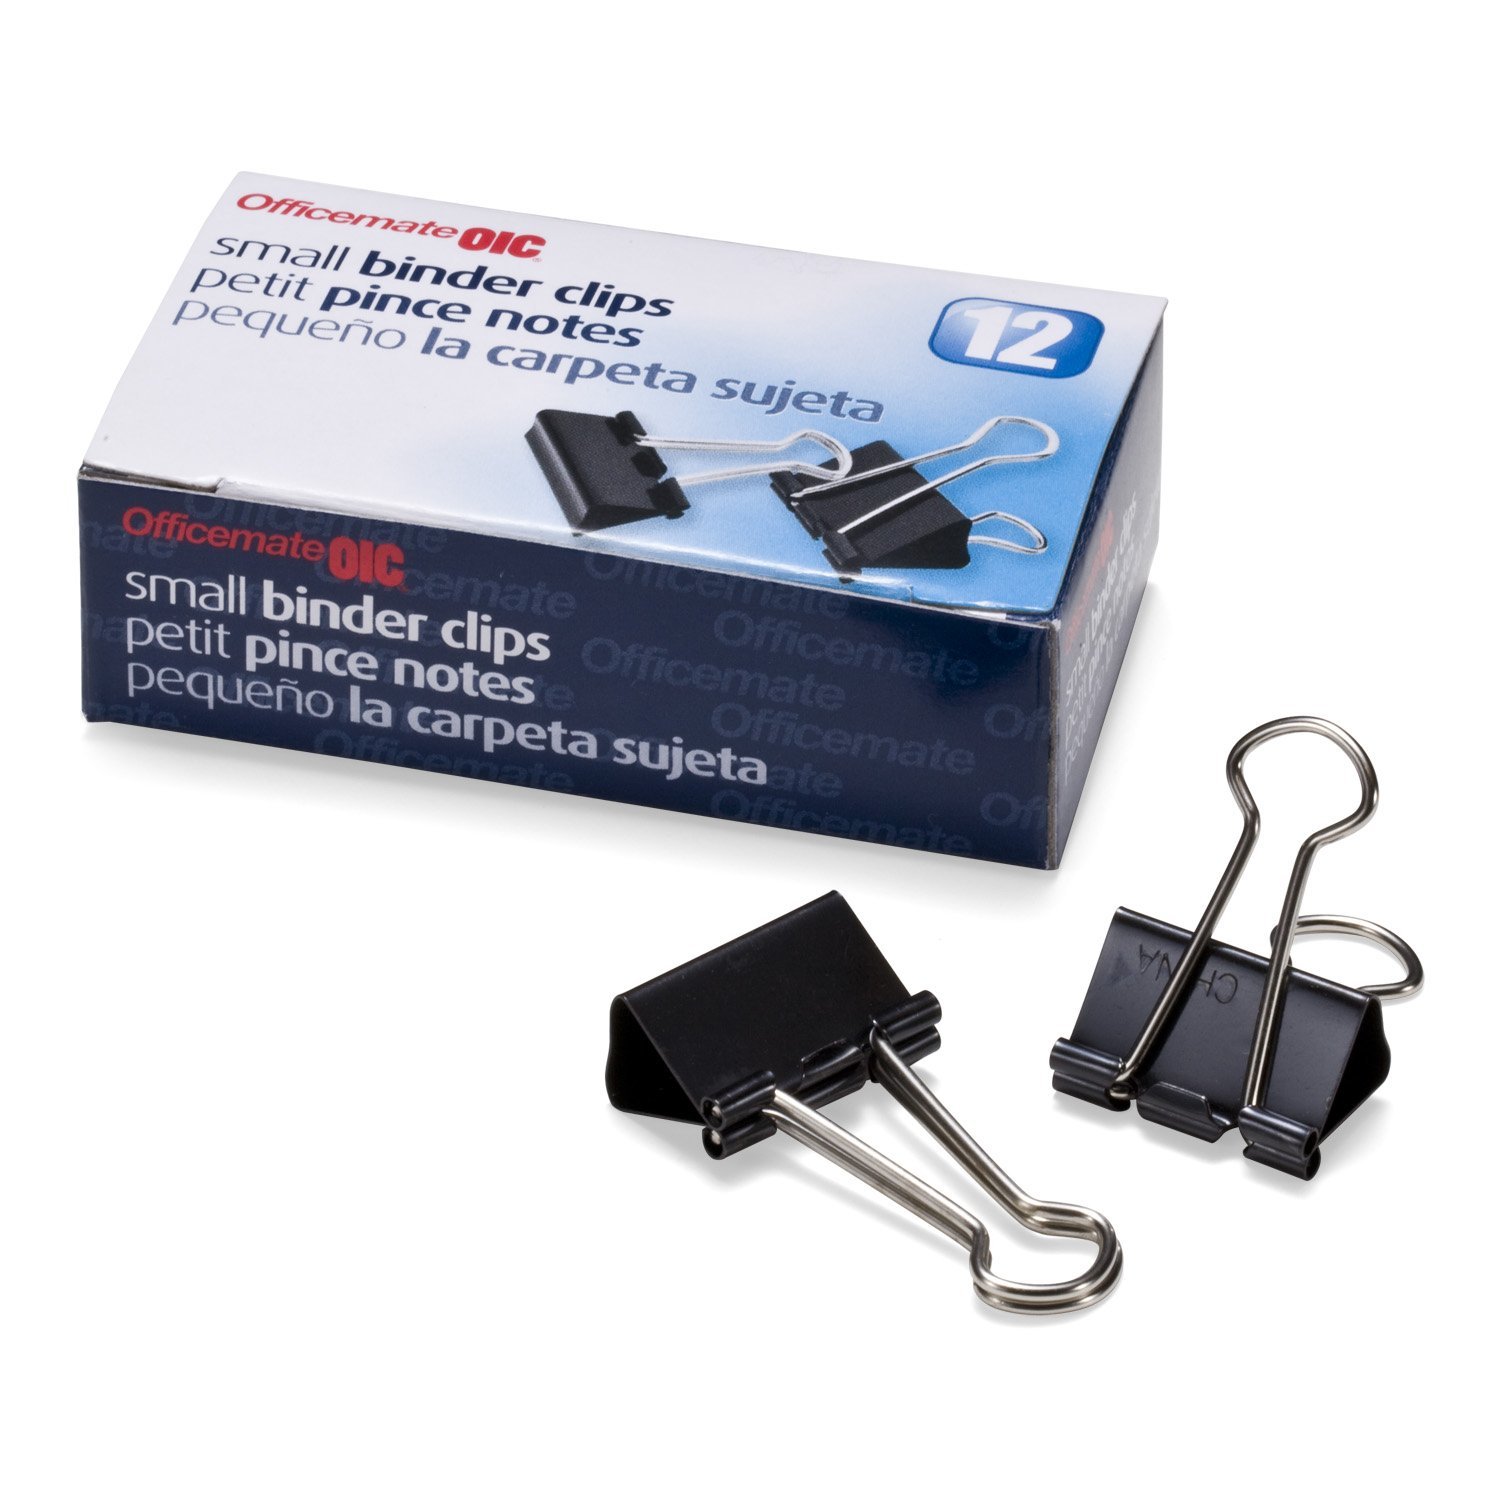 Small (3/4 inch wide) binder clips